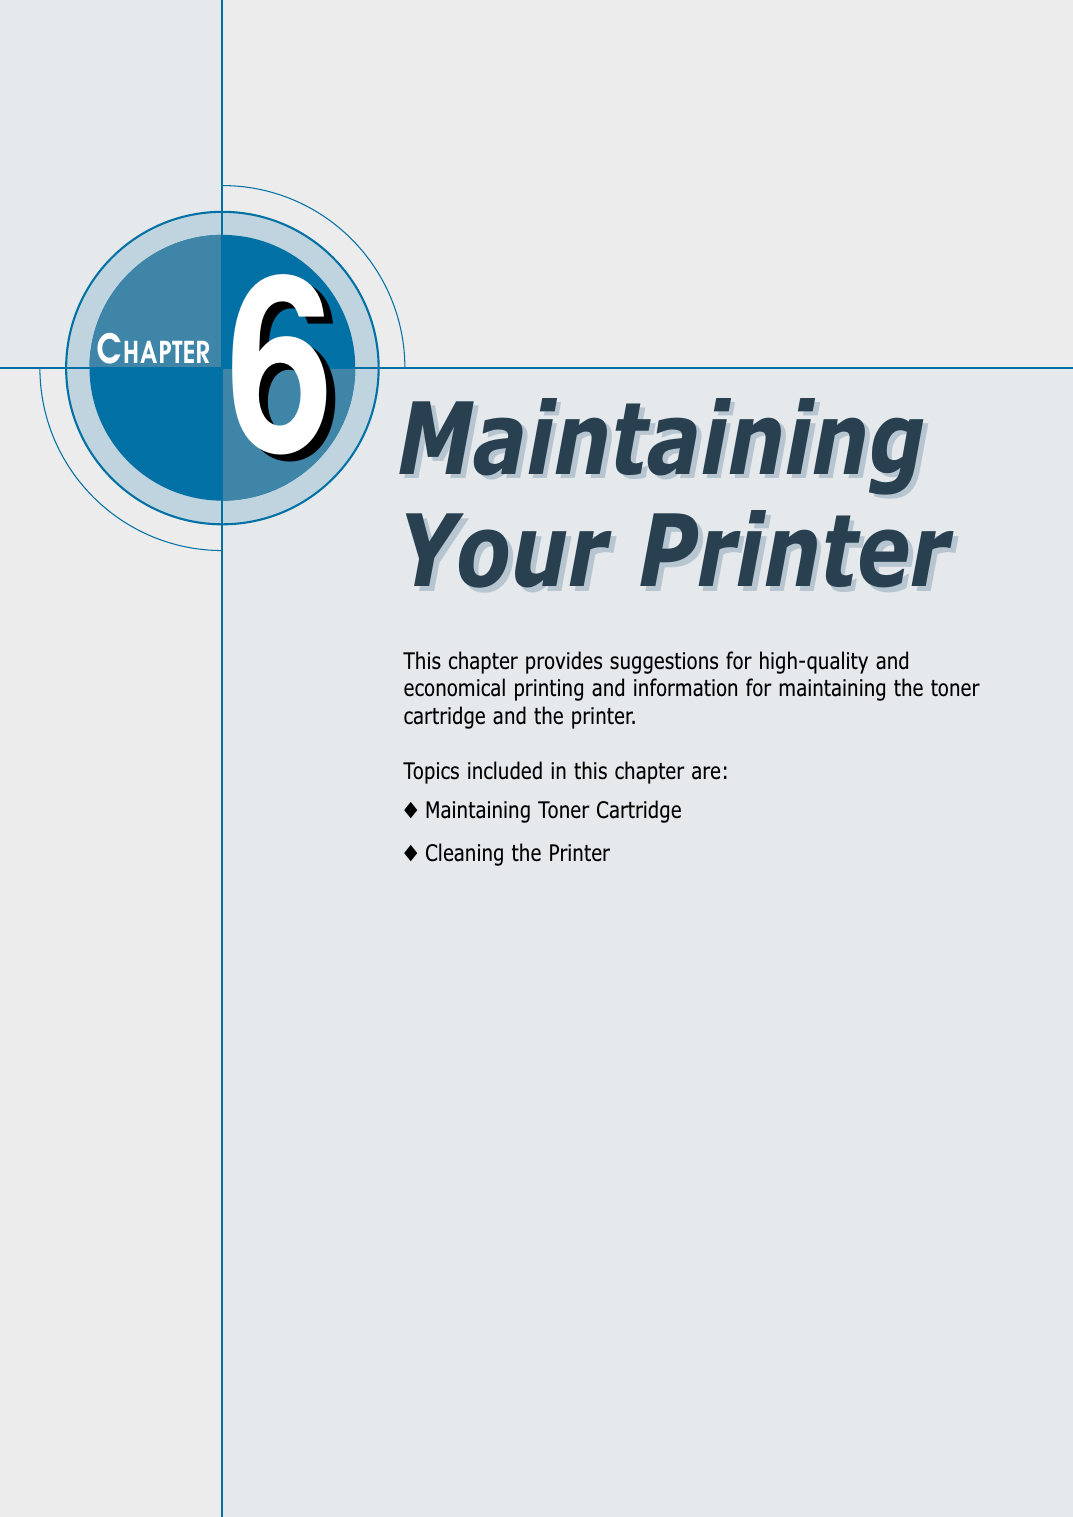 This chapter provides suggestions for high-quality andeconomical printing and information for maintaining the tonercartridge and the printer. Topics included in this chapter are:◆Maintaining Toner Cartridge◆Cleaning the Printer66CHAPTERMaintainingYour PrinterMaintainingYour Printer